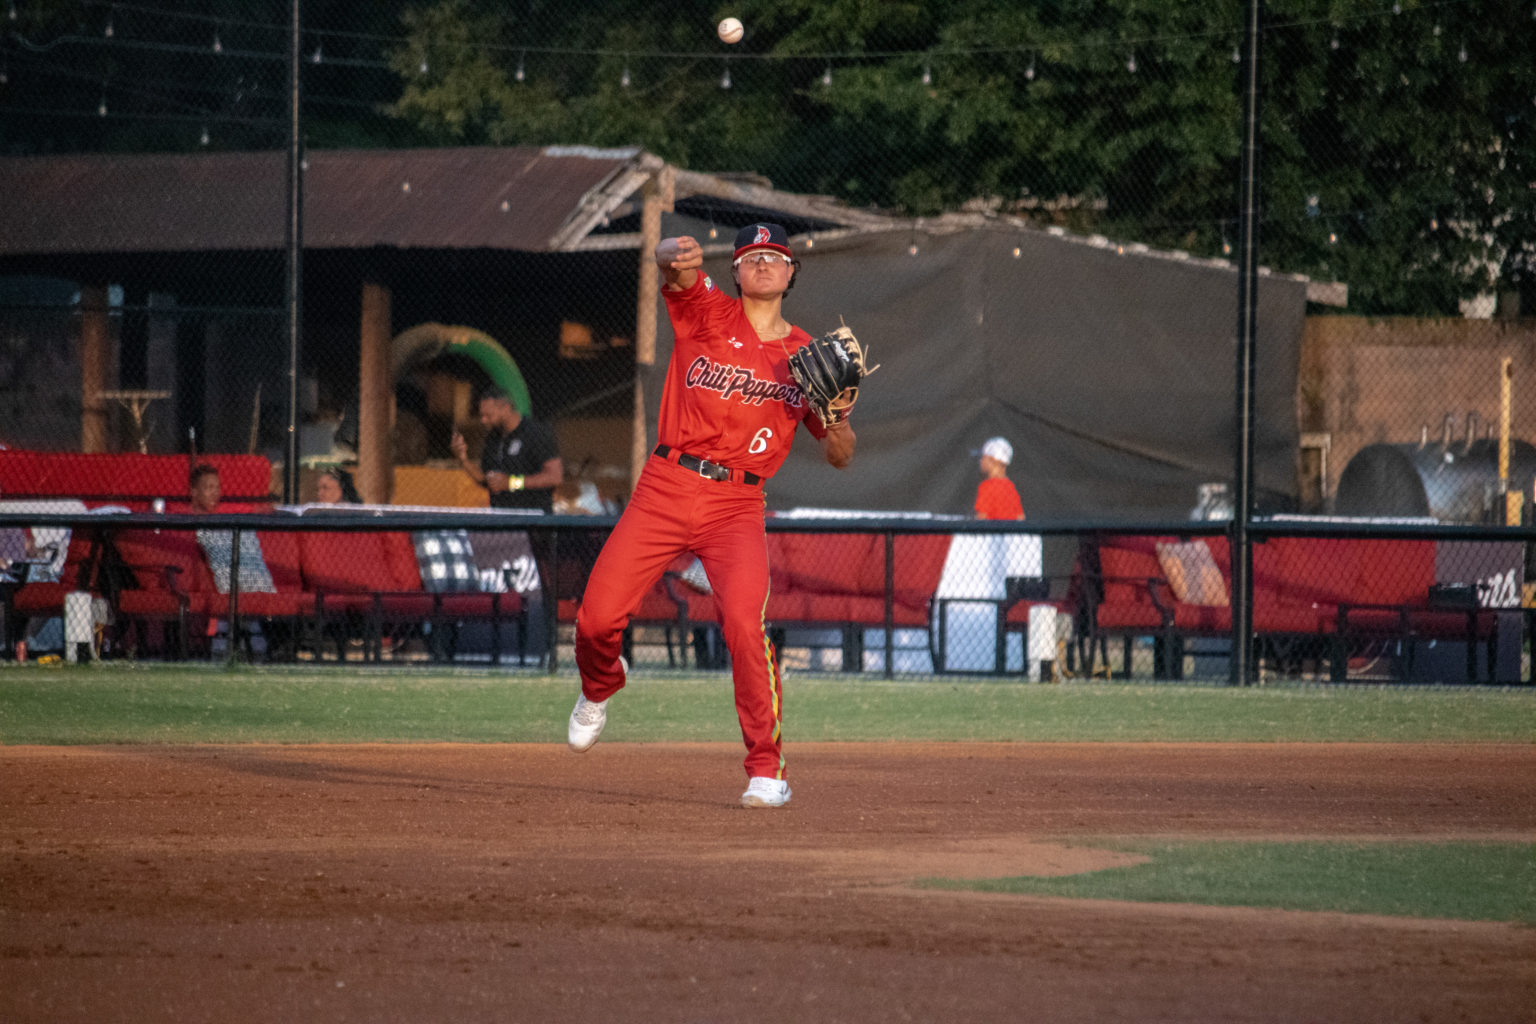 Tri-City Chili Peppers Fall in Home Matchup to Morehead City Marlins